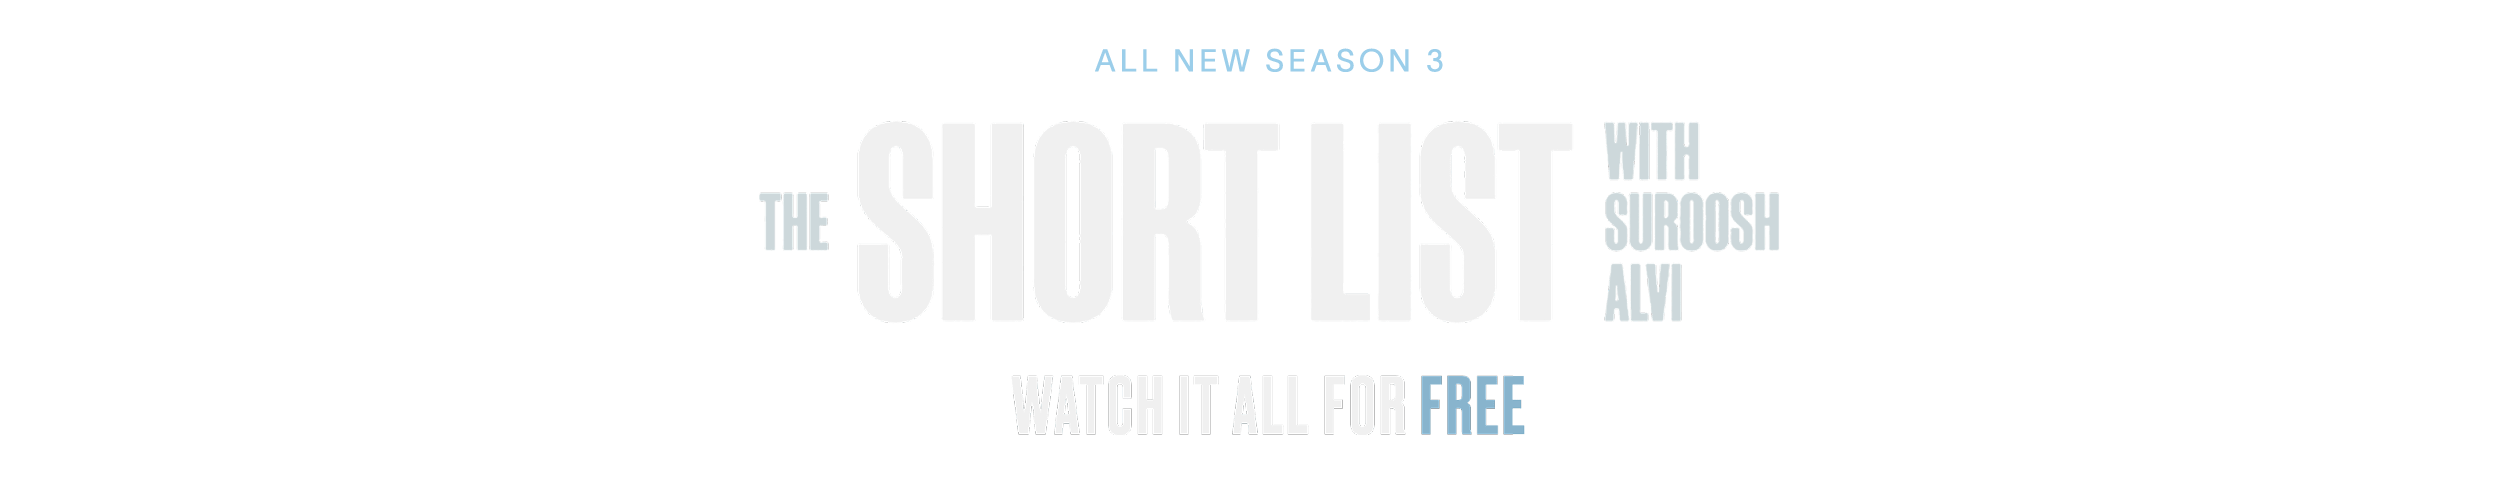 All New Season 3. The Short List with Suroosh Alvi. Watch it all for free.